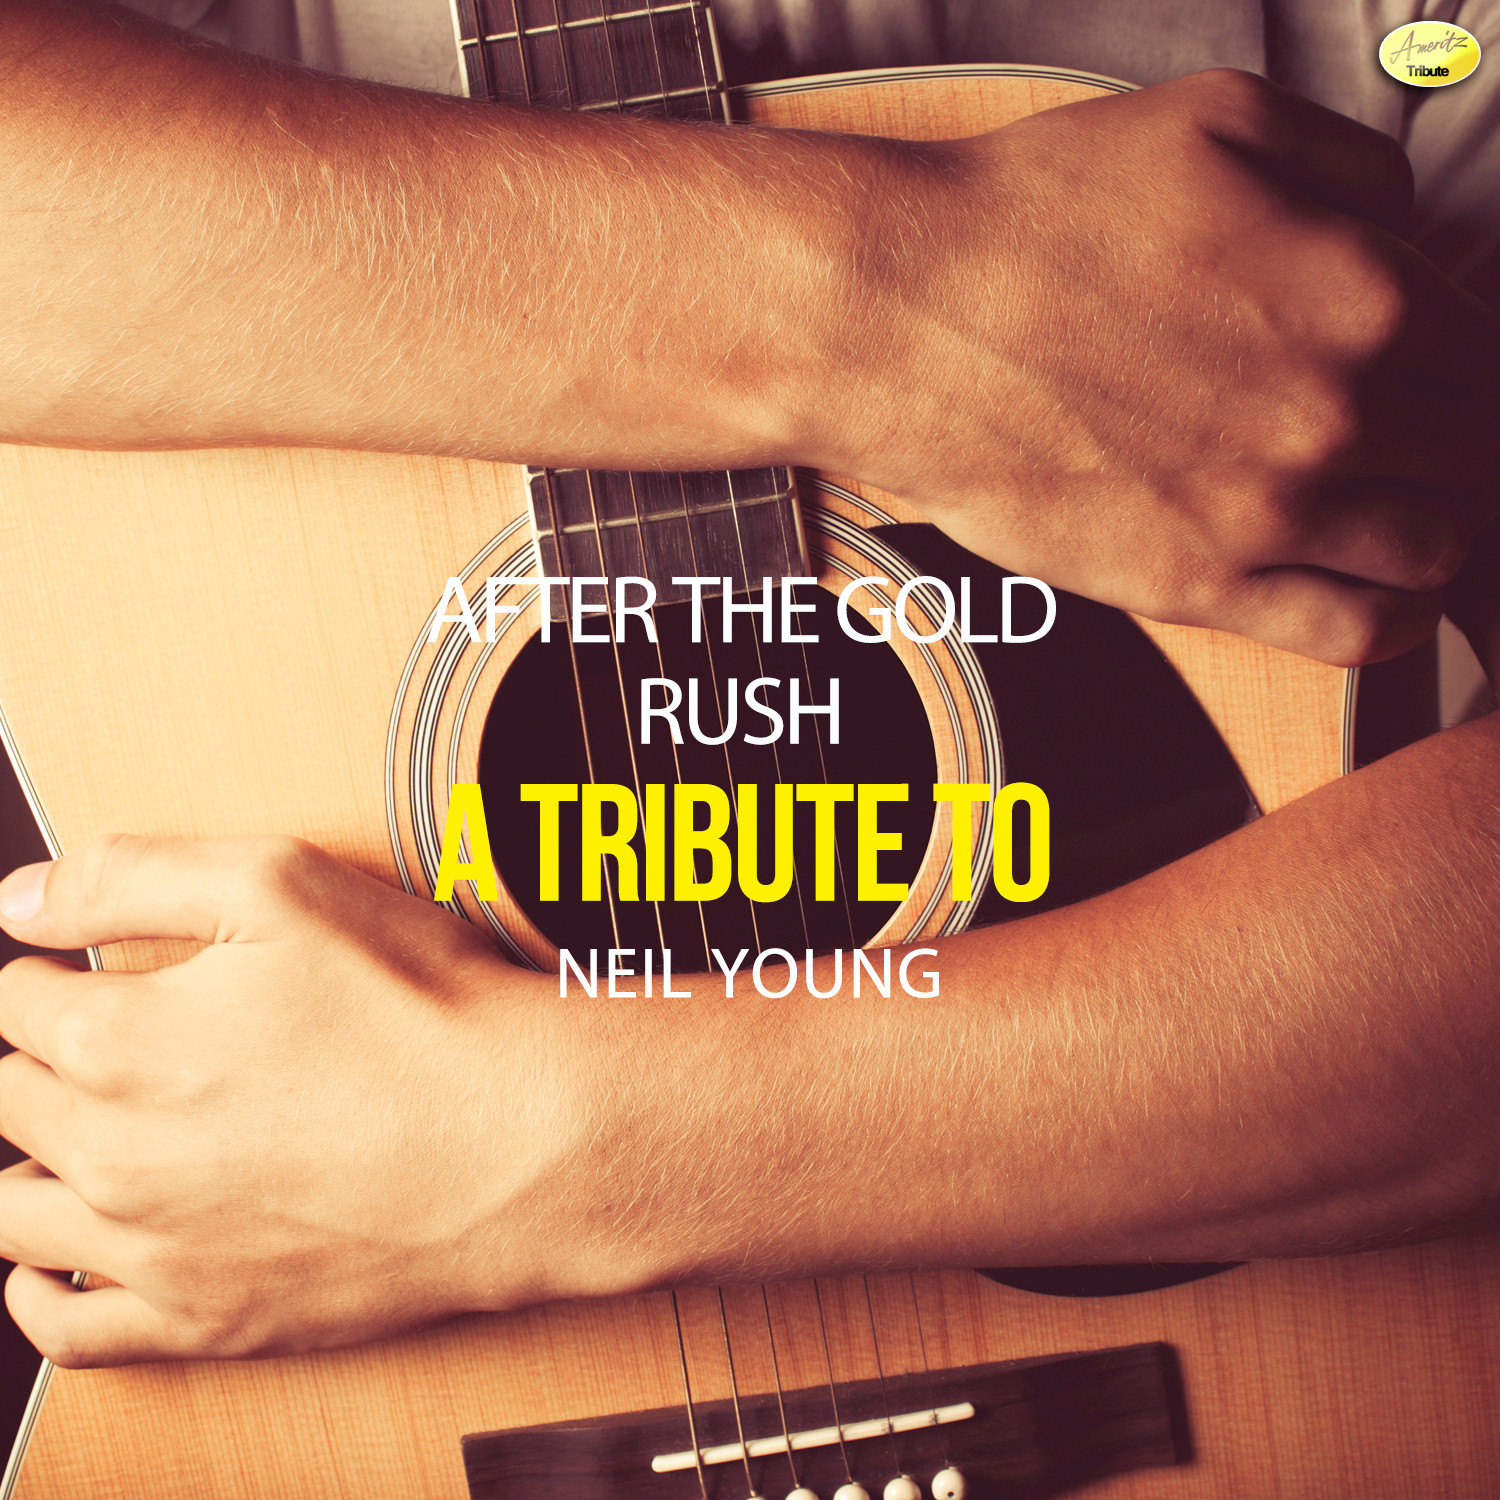 After the Gold Rush - A Tribute to Neil Young